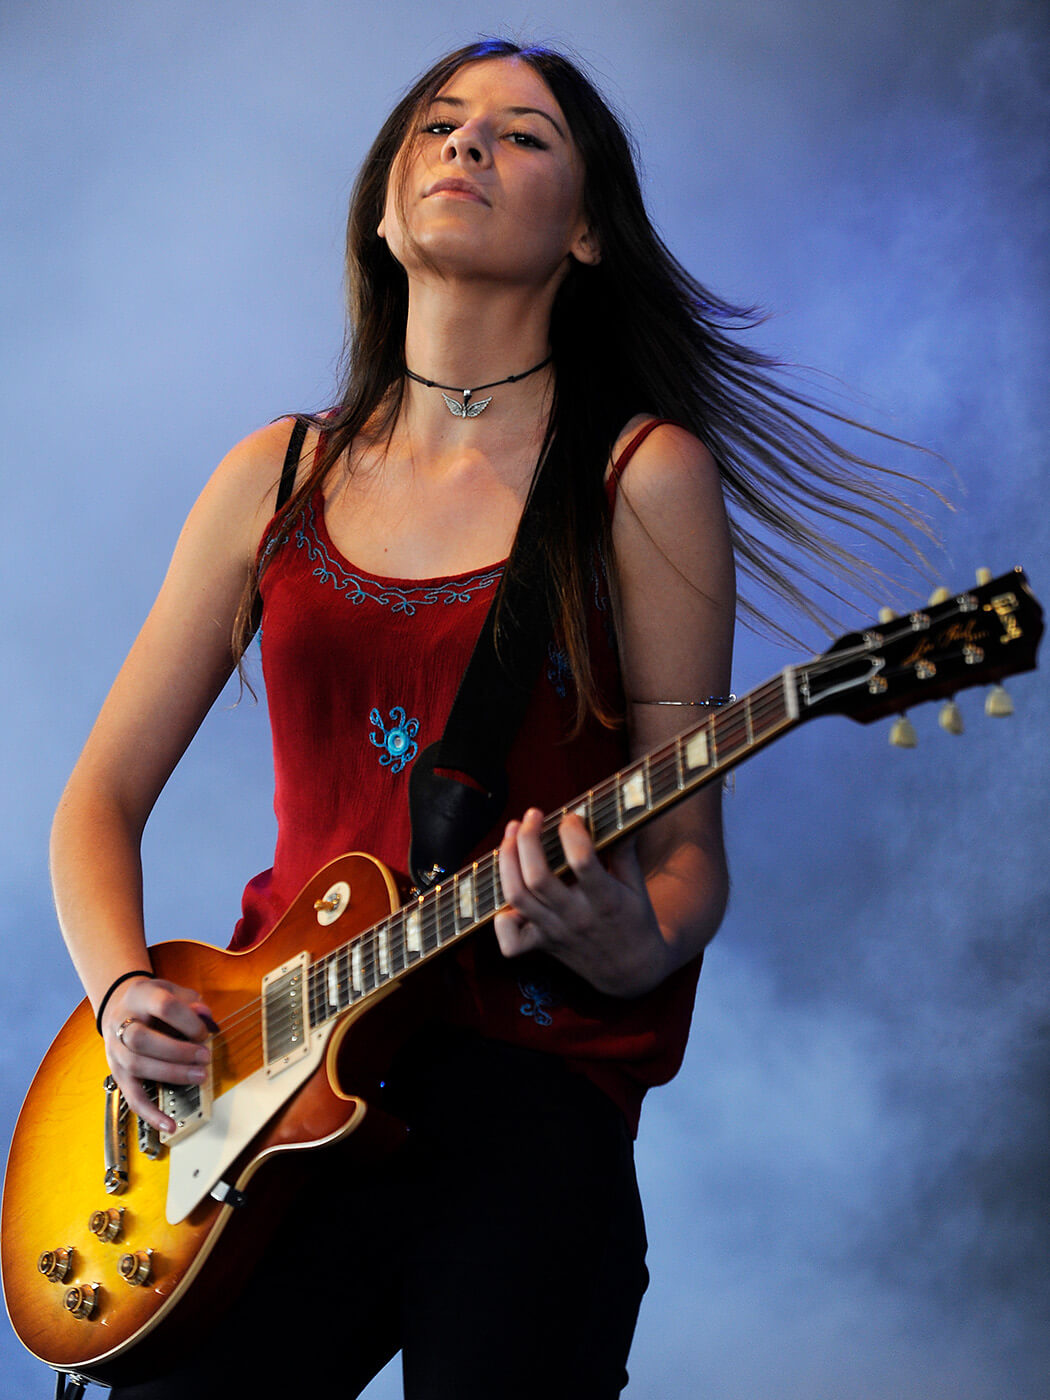 Hannah Findlay of Stonefield performs on stage at the Pyramid Rock Festival on December 30, 2012 in Melbourne, Australia.